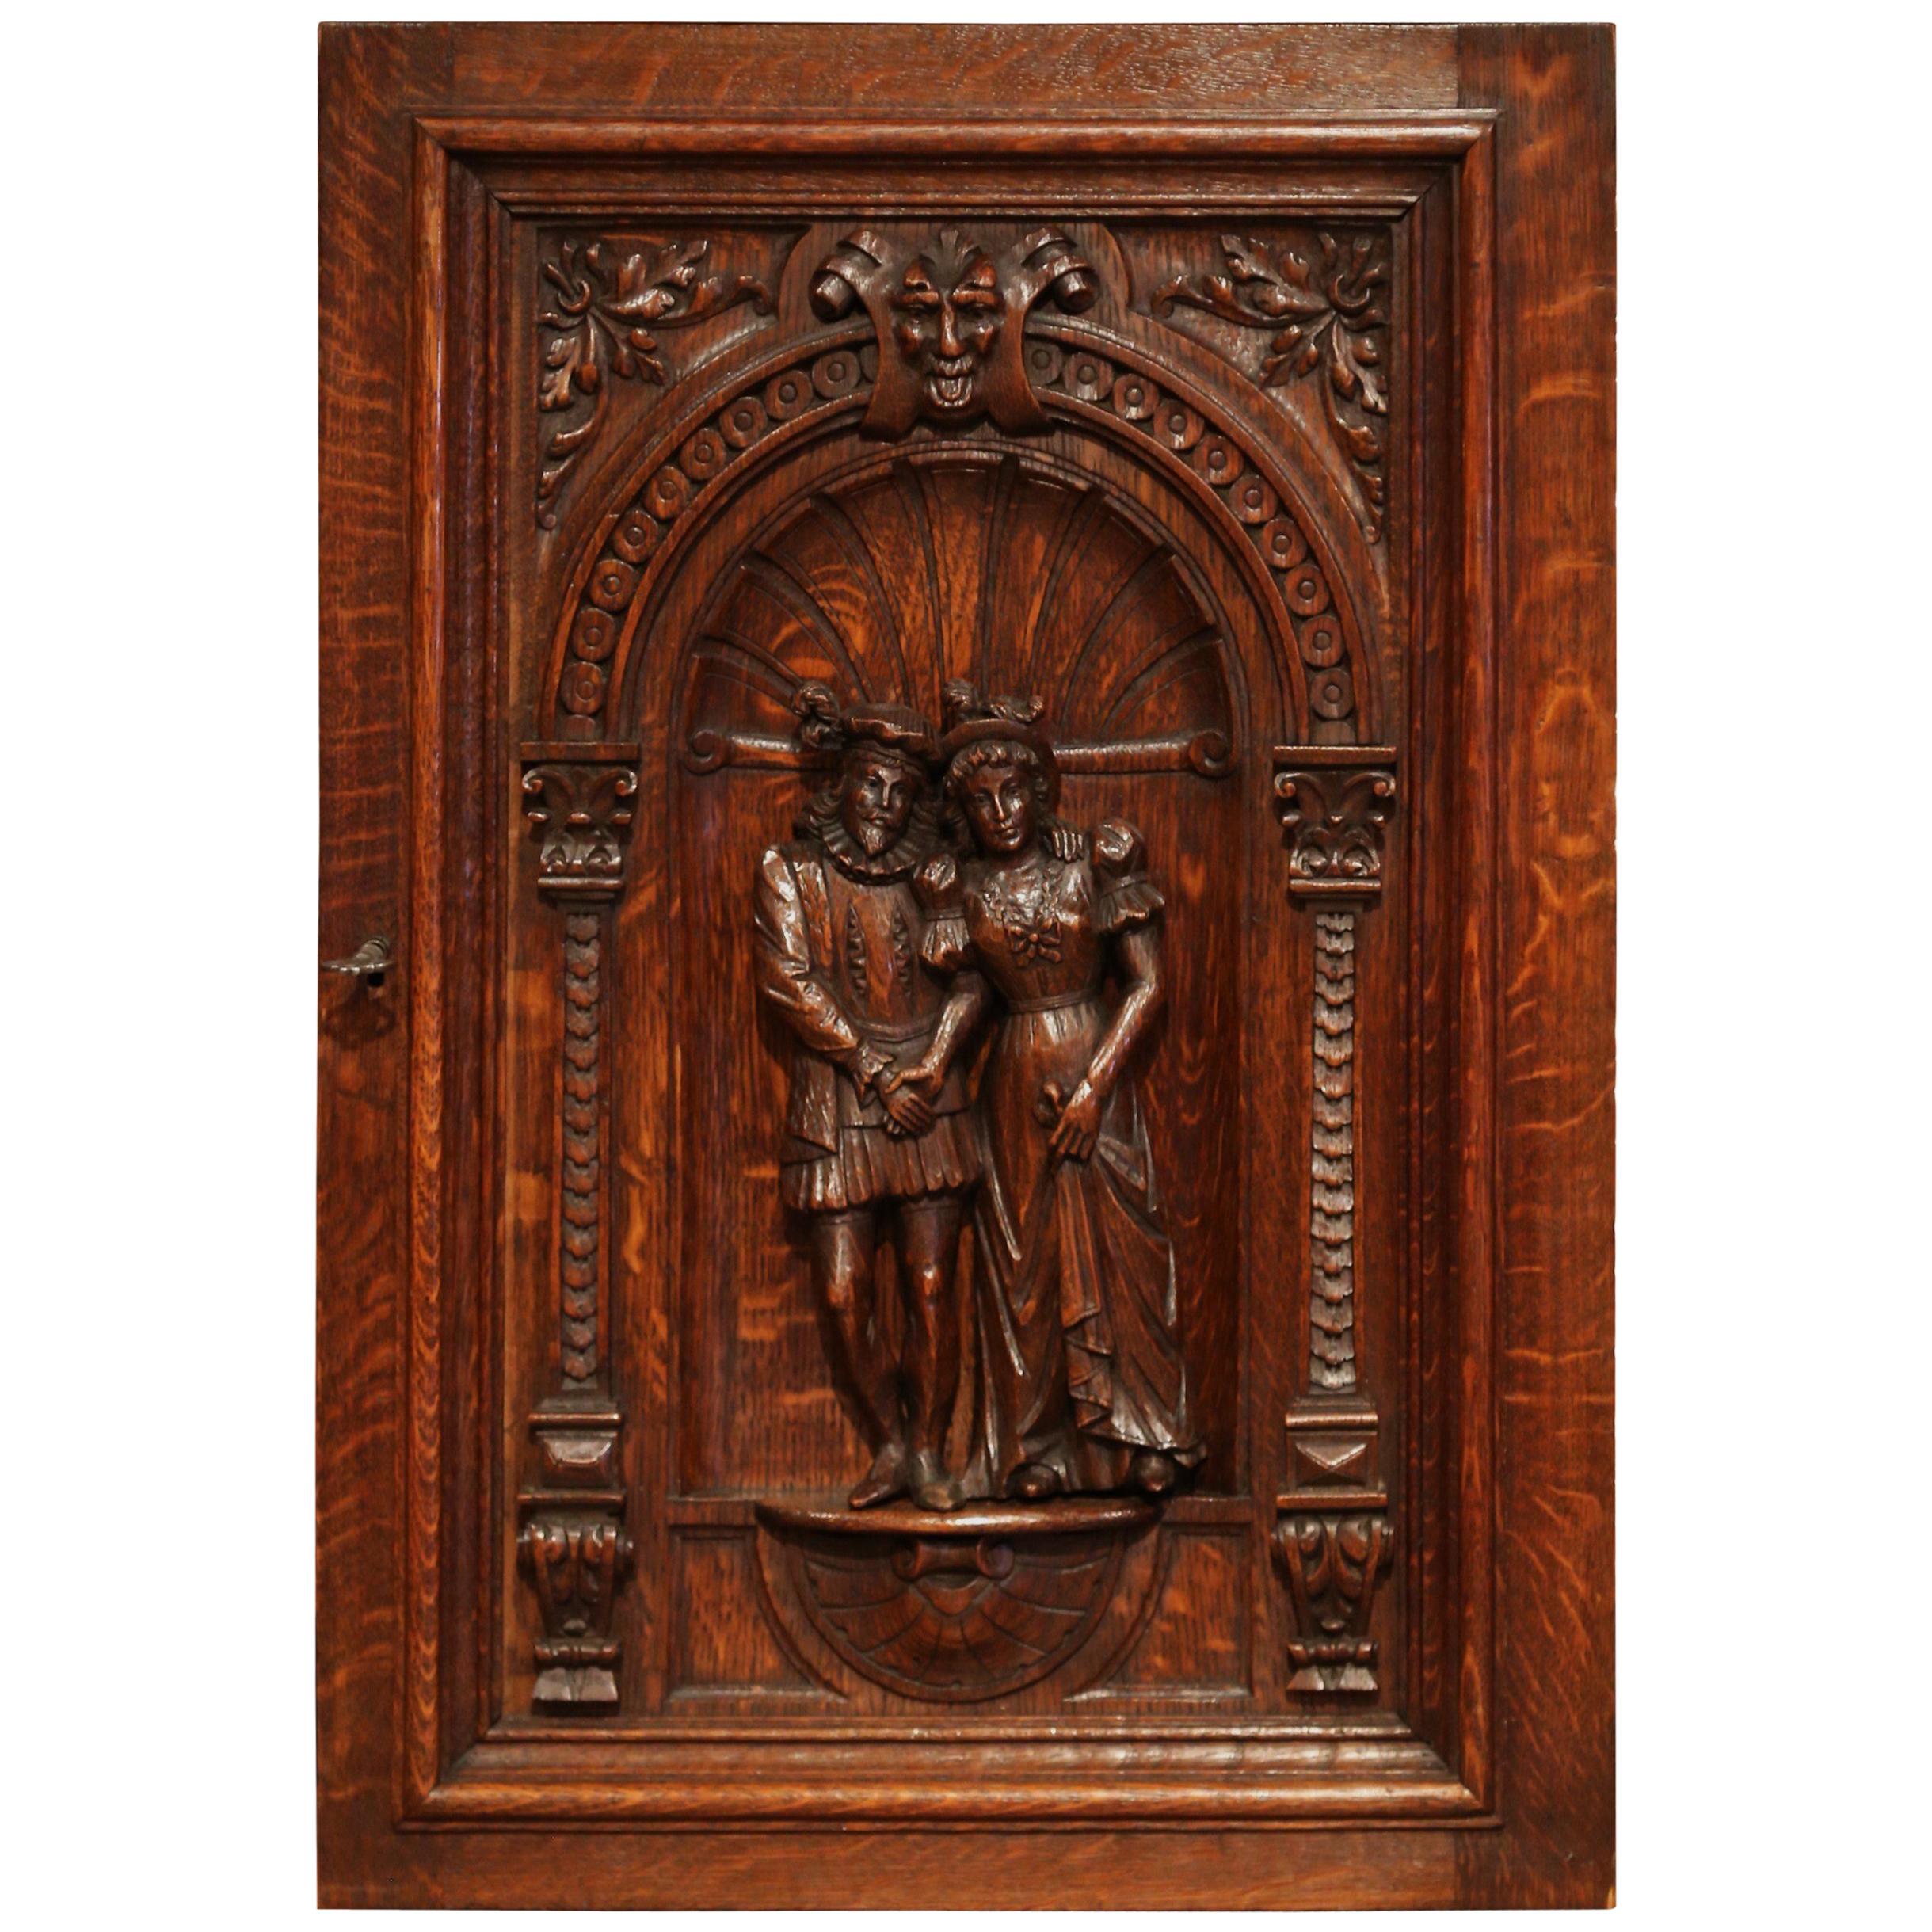 19th Century French Henri II Carved Oak Cabinet Door with High Relief Carvings